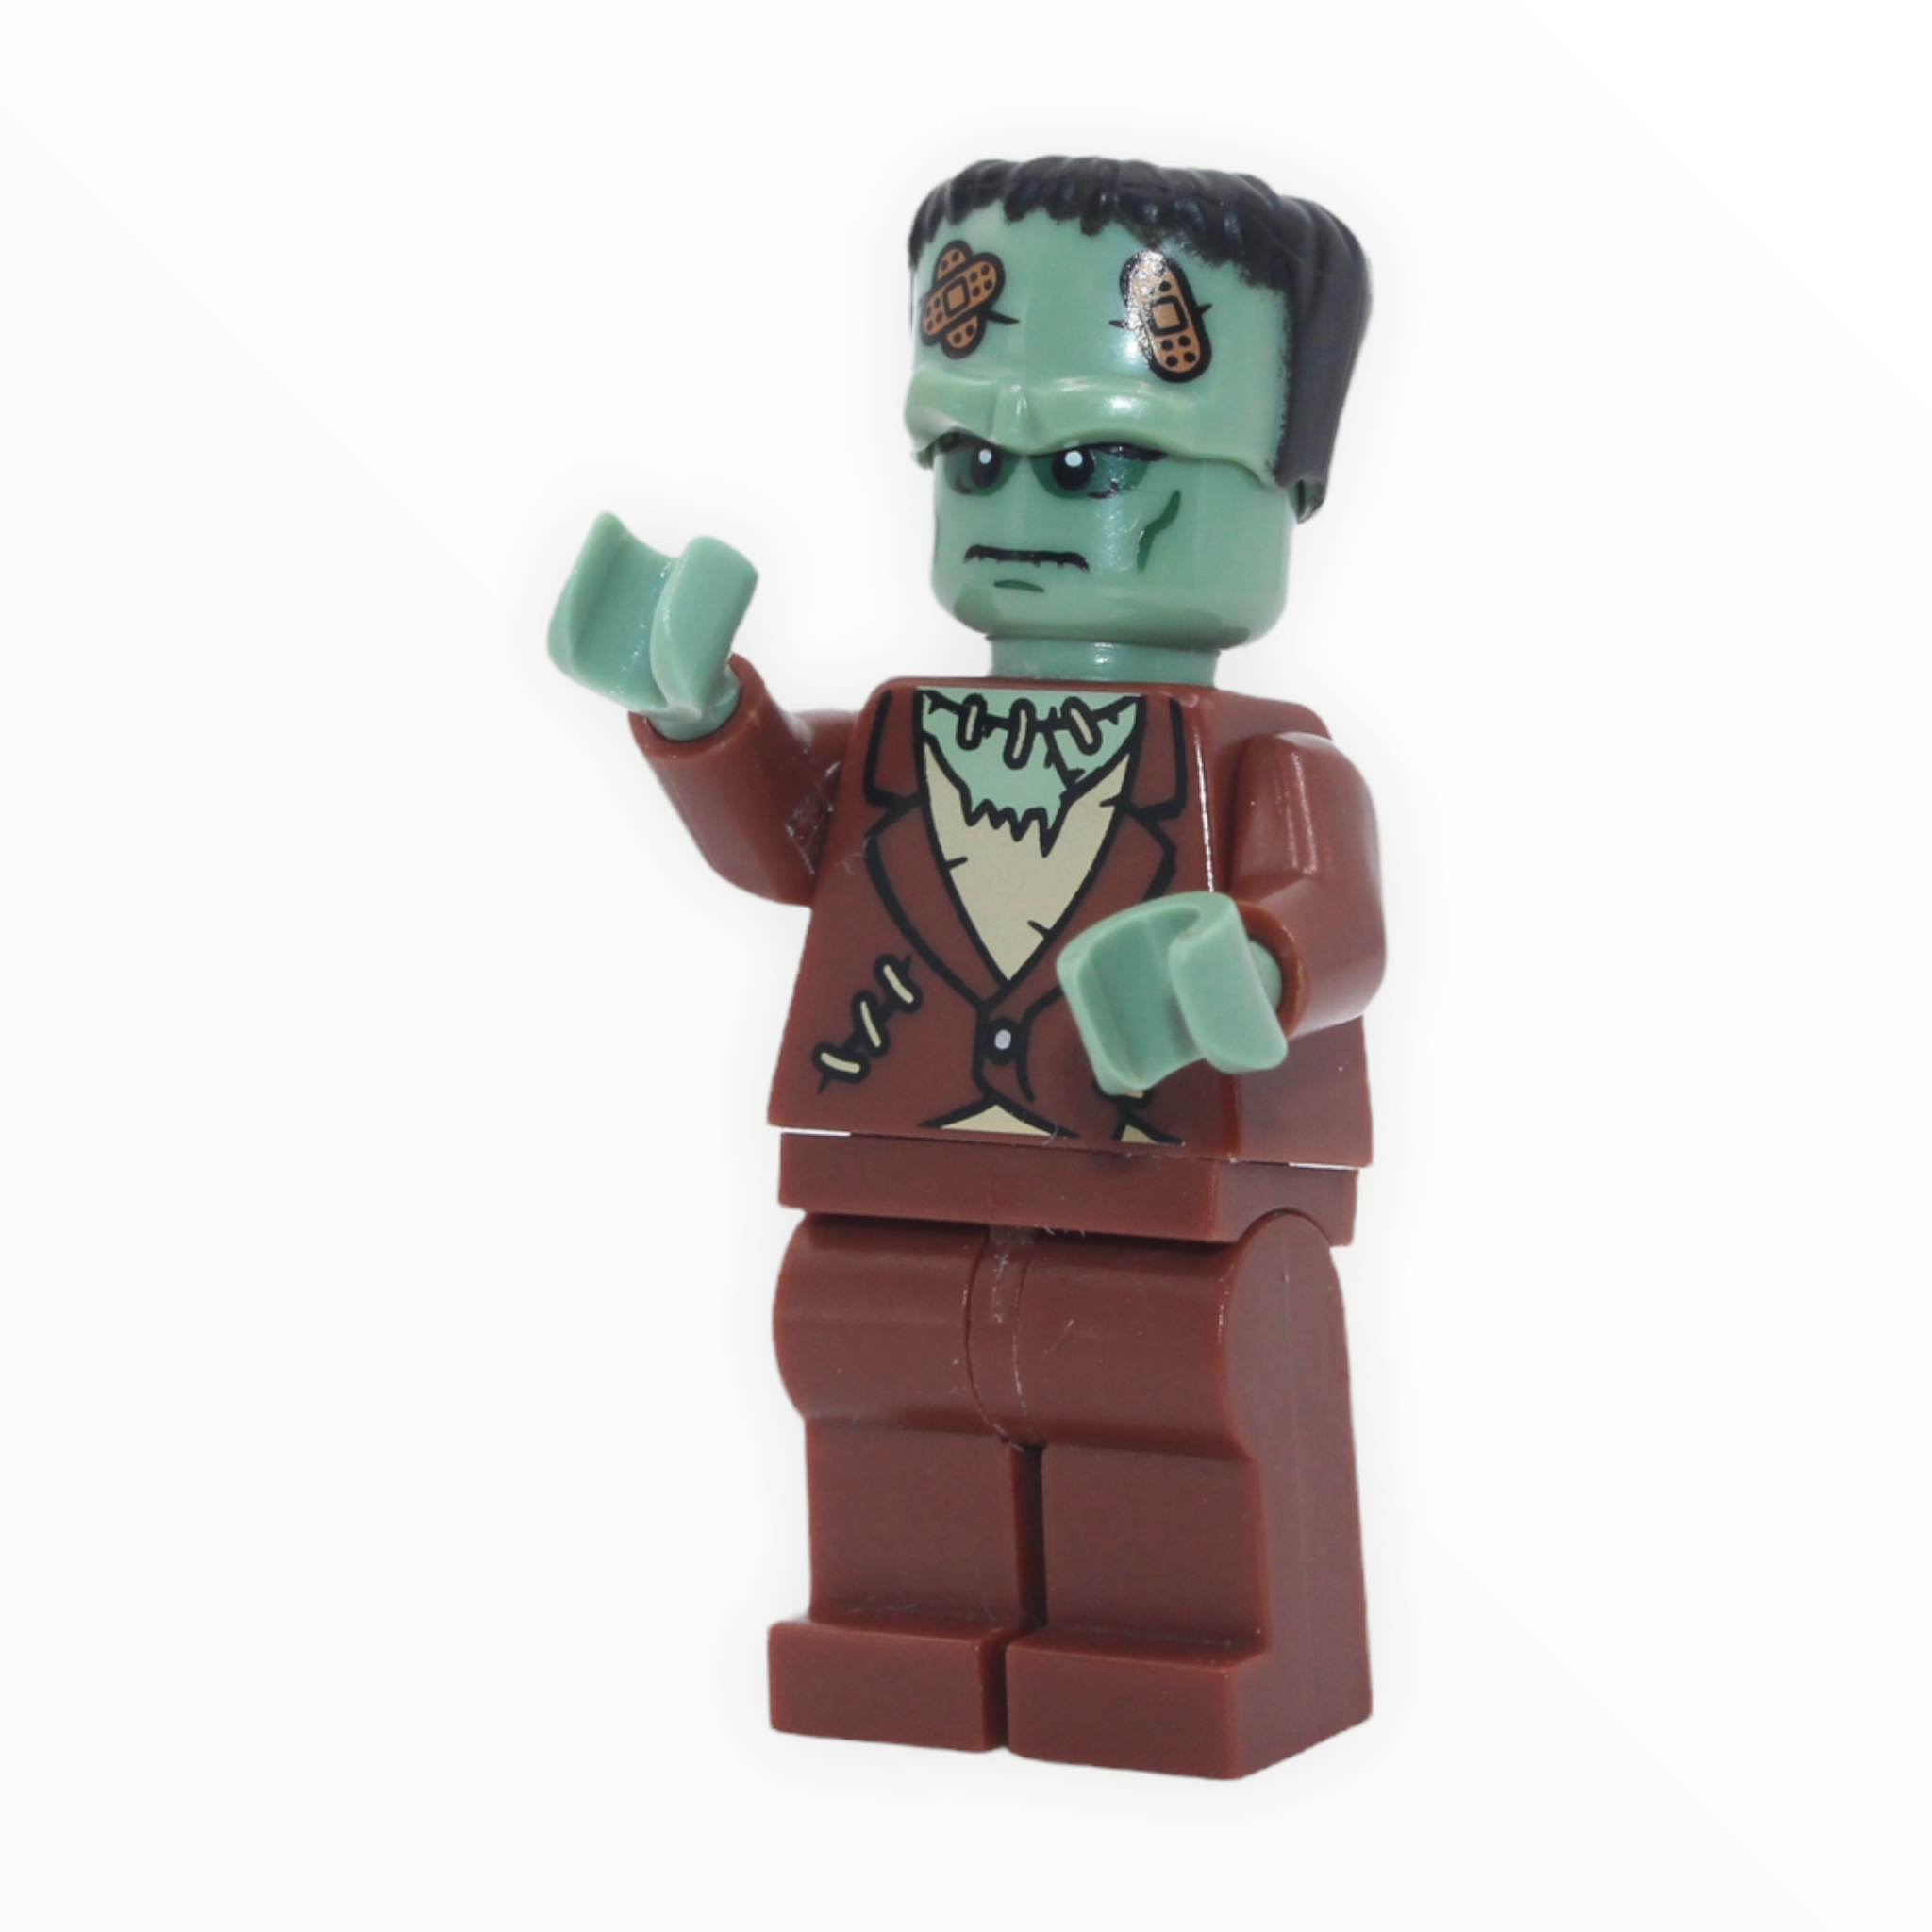 LEGO Series 4: The Monster